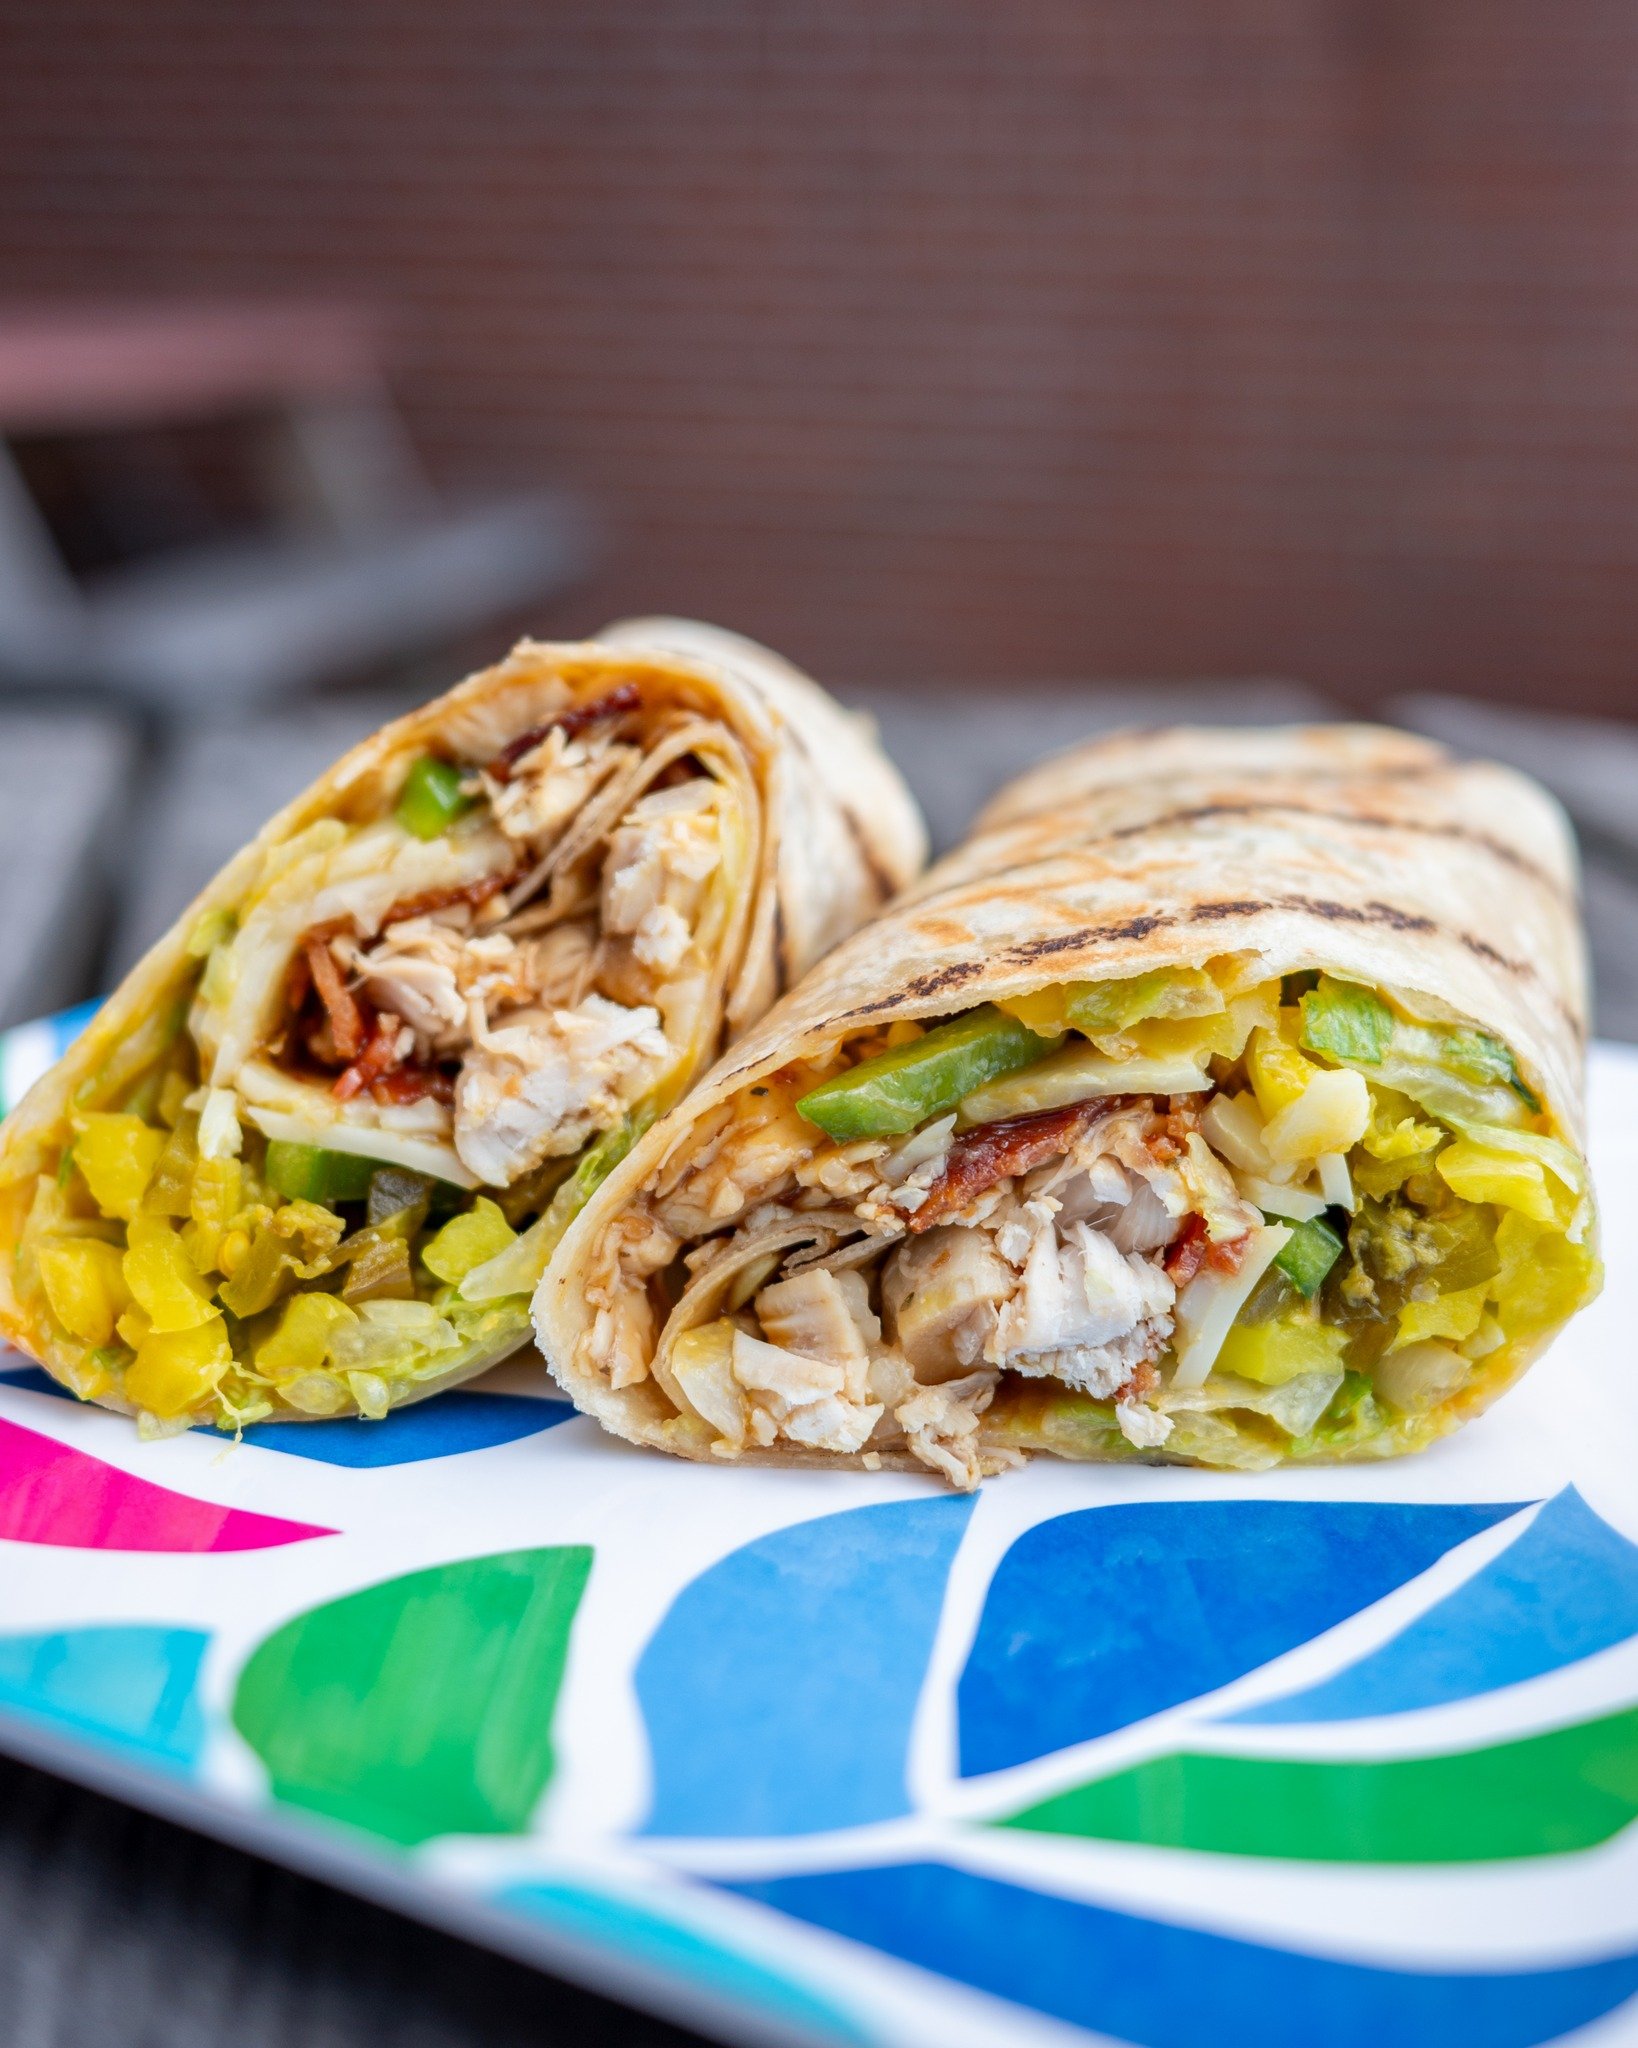 Can you take the heat? 🔥

The Moose on the Loose is made with chicken, bacon, pepper jack cheese, jalape&ntilde;os, green peppers, banana peppers, romaine, carolina barbecue sauce and it will kickstart your taste buds 😍

Grab it on a gluten free wh